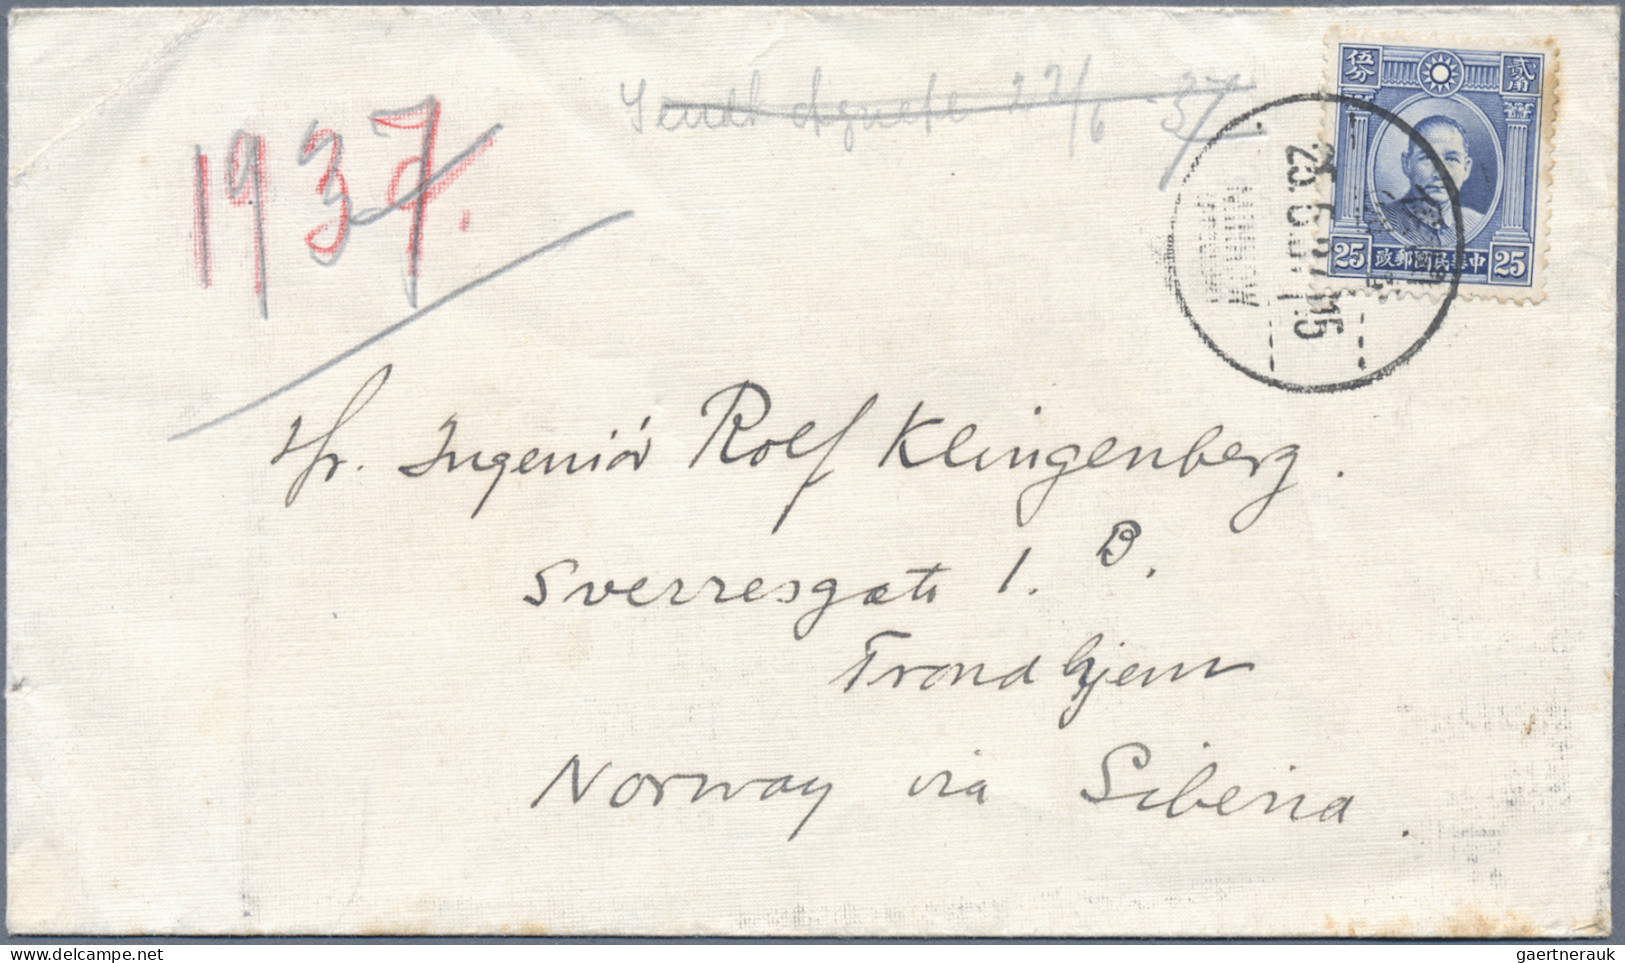 China: 1932/1938, covers (22) with SYS frankings inc. air mail and registration,